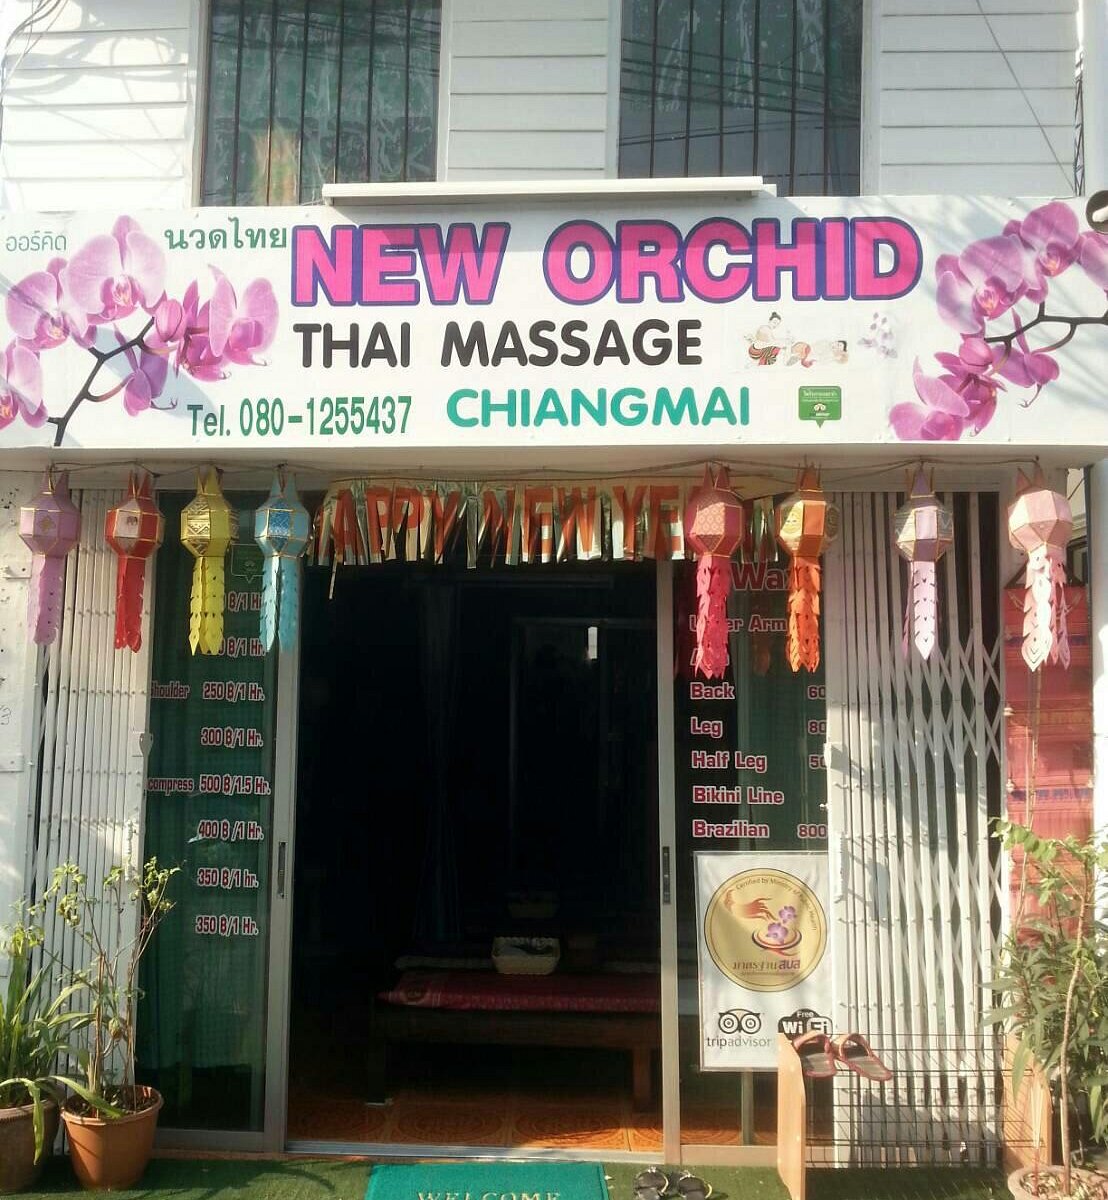 New Orchid Thai Massage And Spa Chiang Mai Updated 2021 All You Need To Know Before You Go